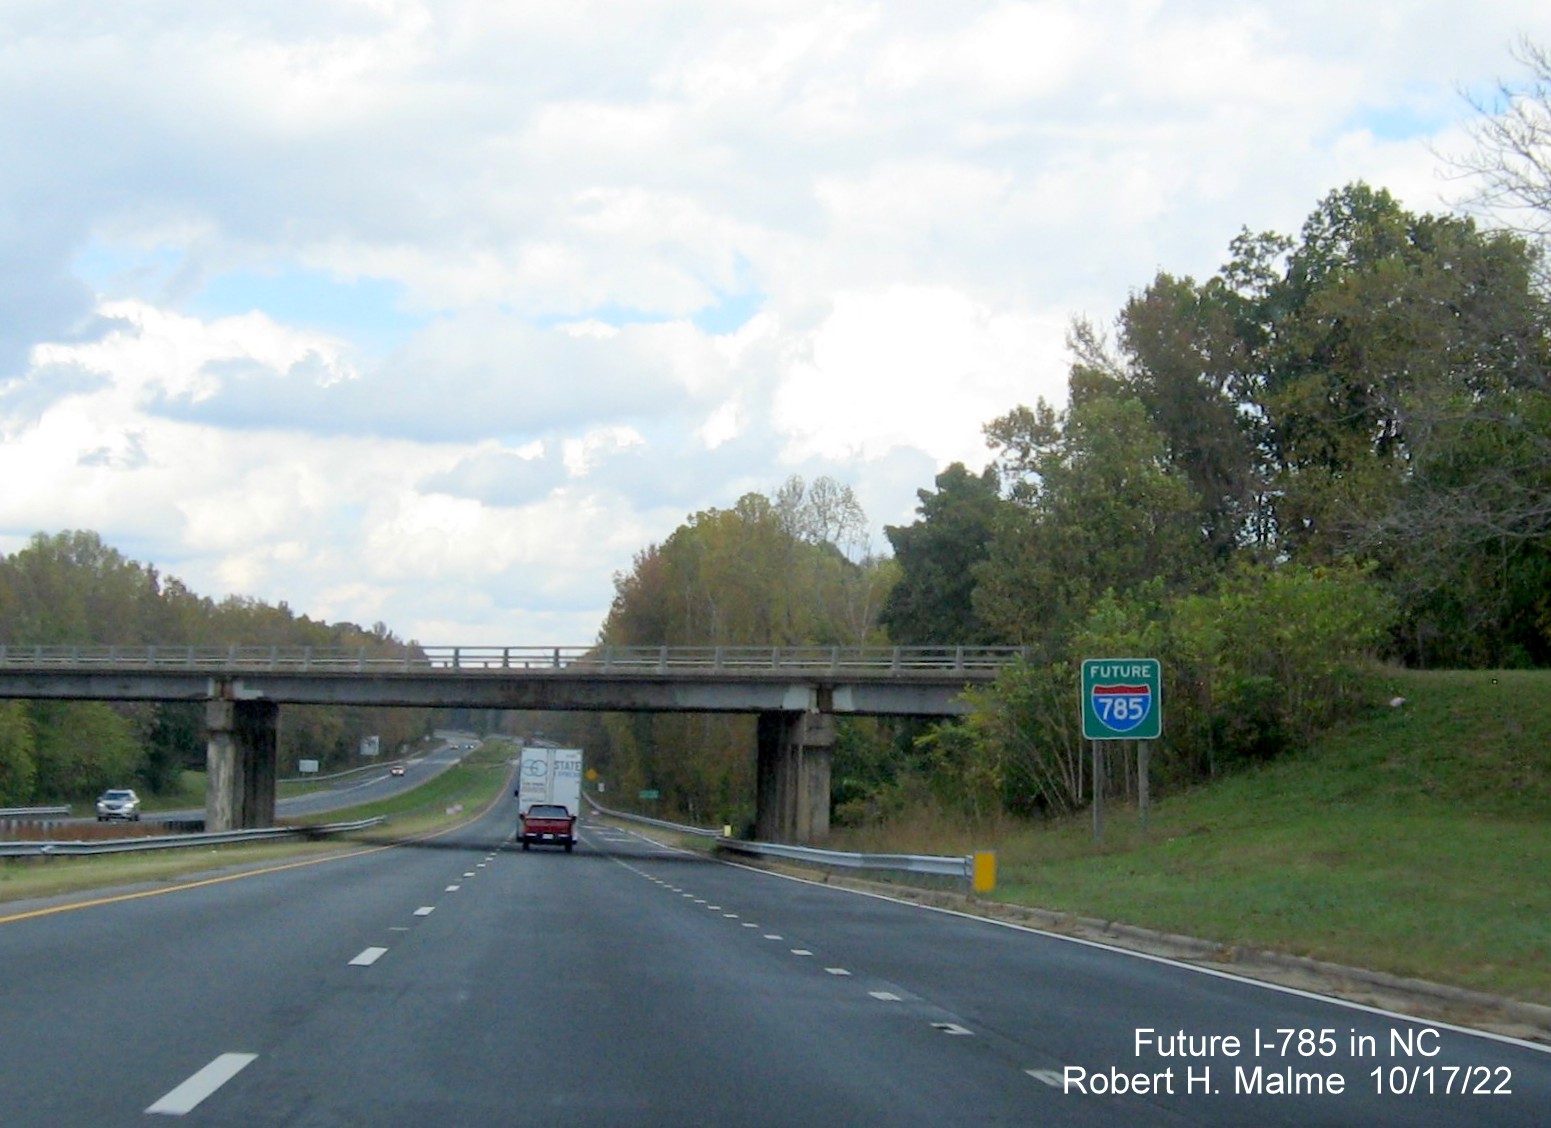 Image of a Future I-785 sign located after Business US 29 exit on US 29 North in Reidsville, October 2022